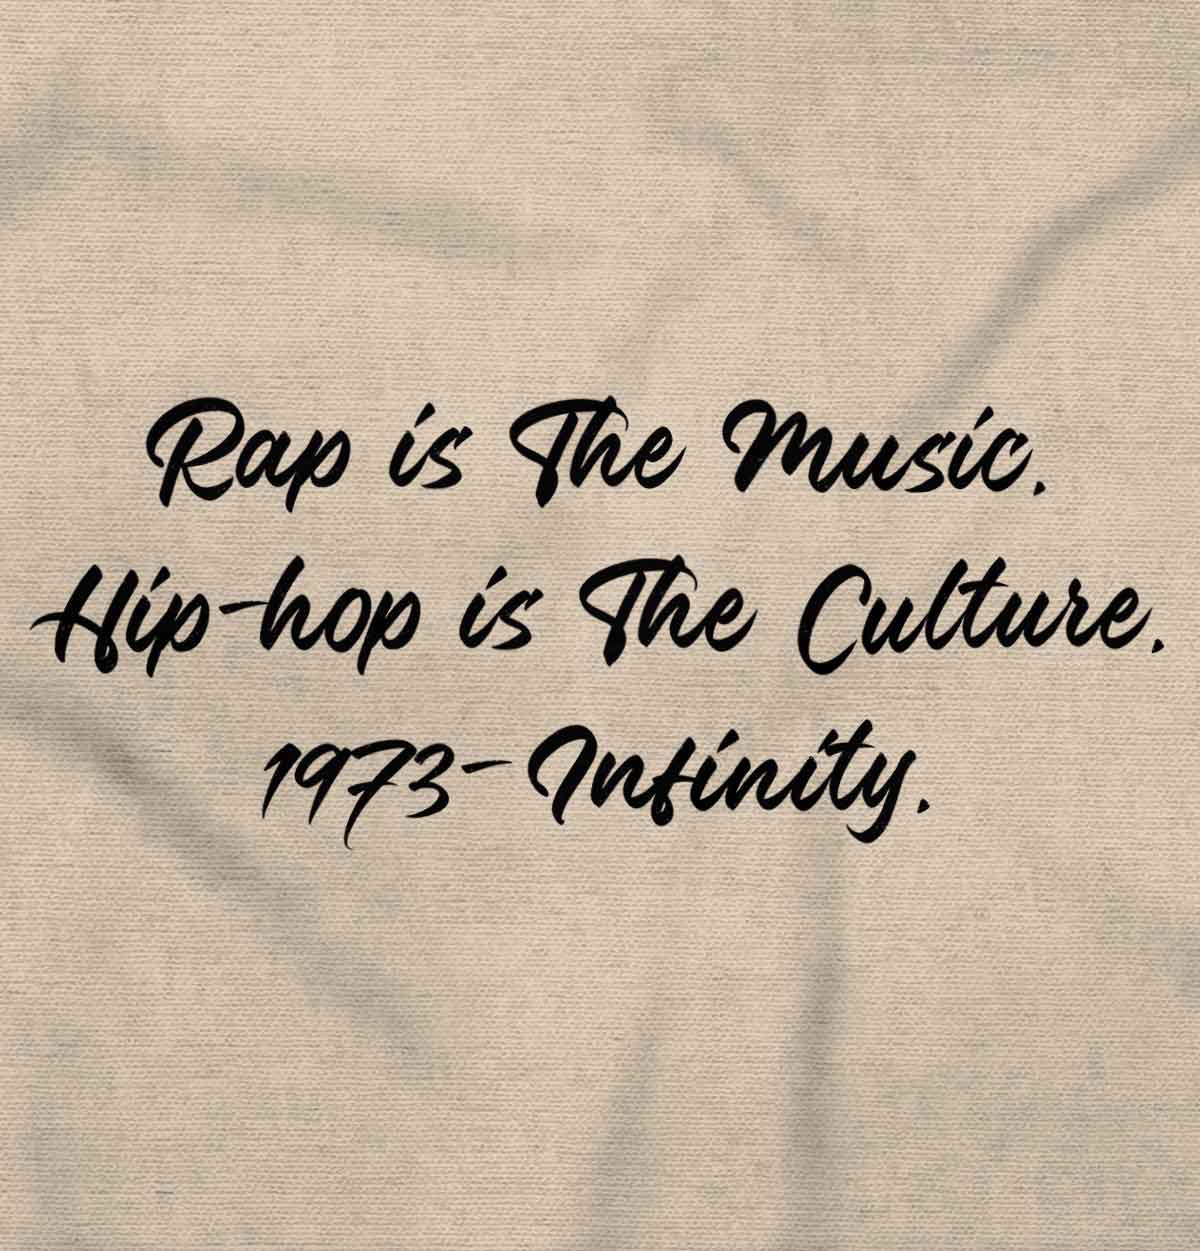 This image celebrates the 50th anniversary of hip-hop and pays tribute to its pioneers, showcasing the culture and power of rap music that has been a part of our lives since 1973 and will continue to thrive.